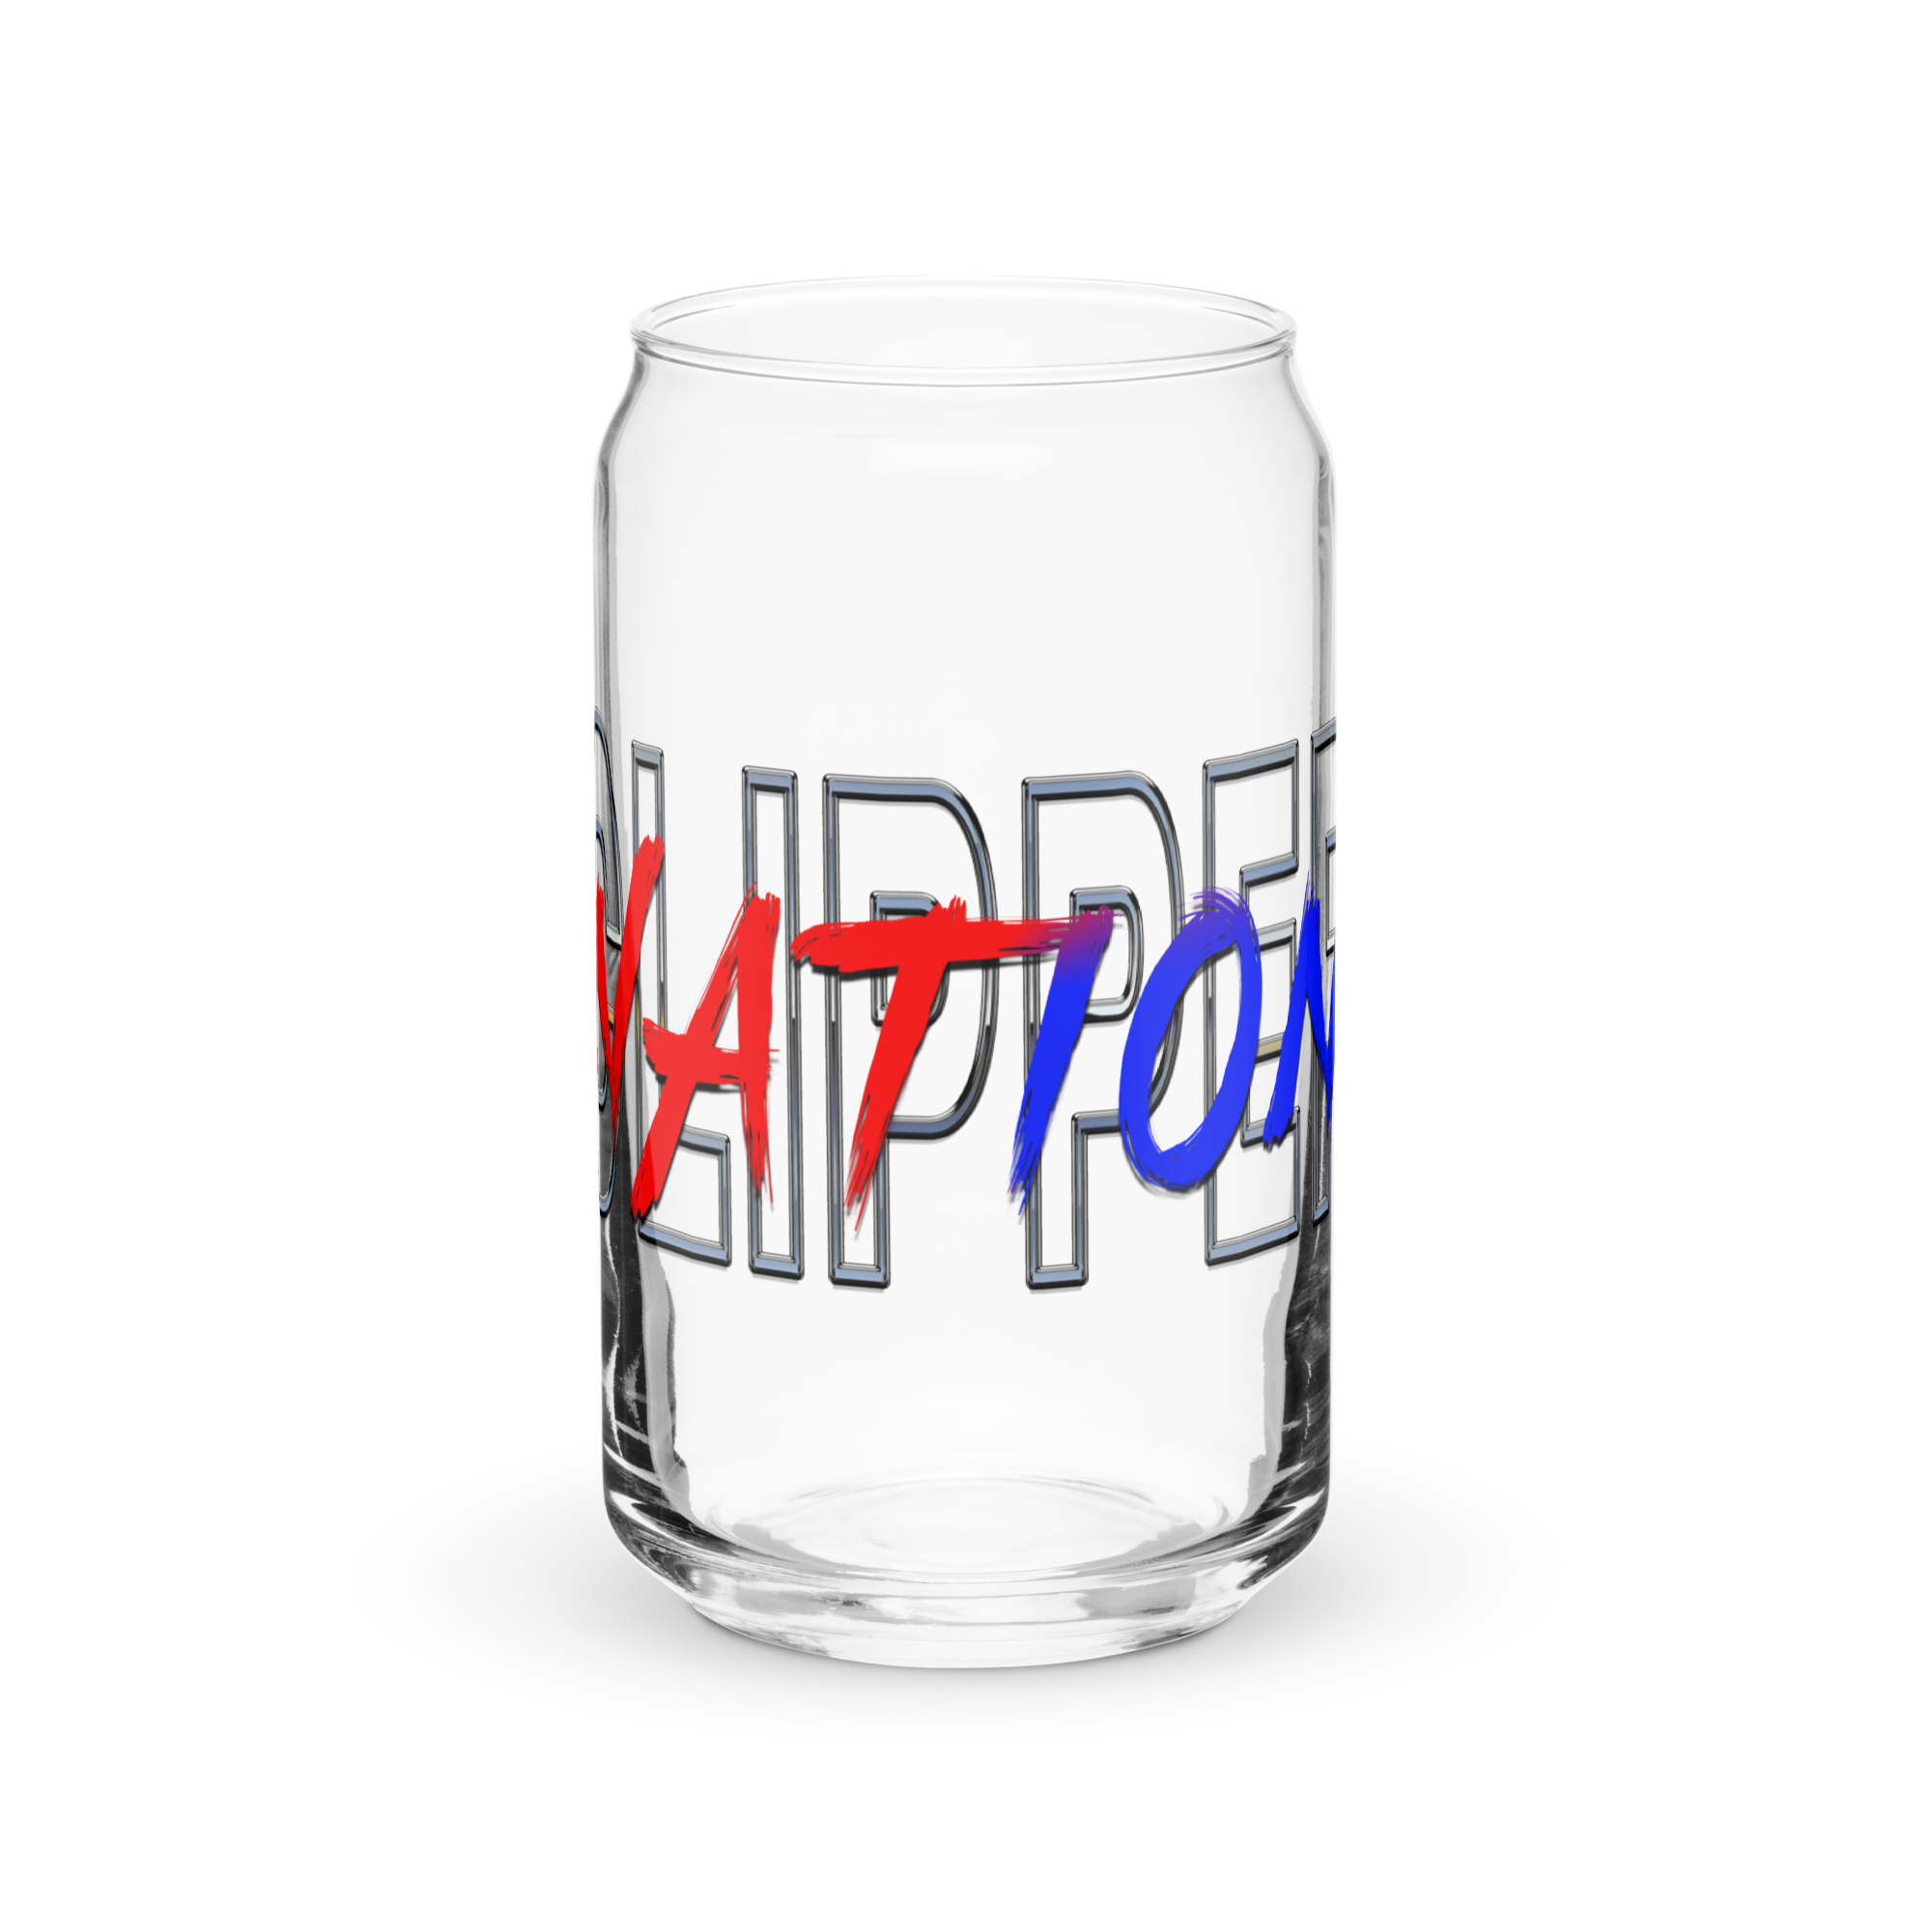 Clipper Nation Gradient Can-shaped glass